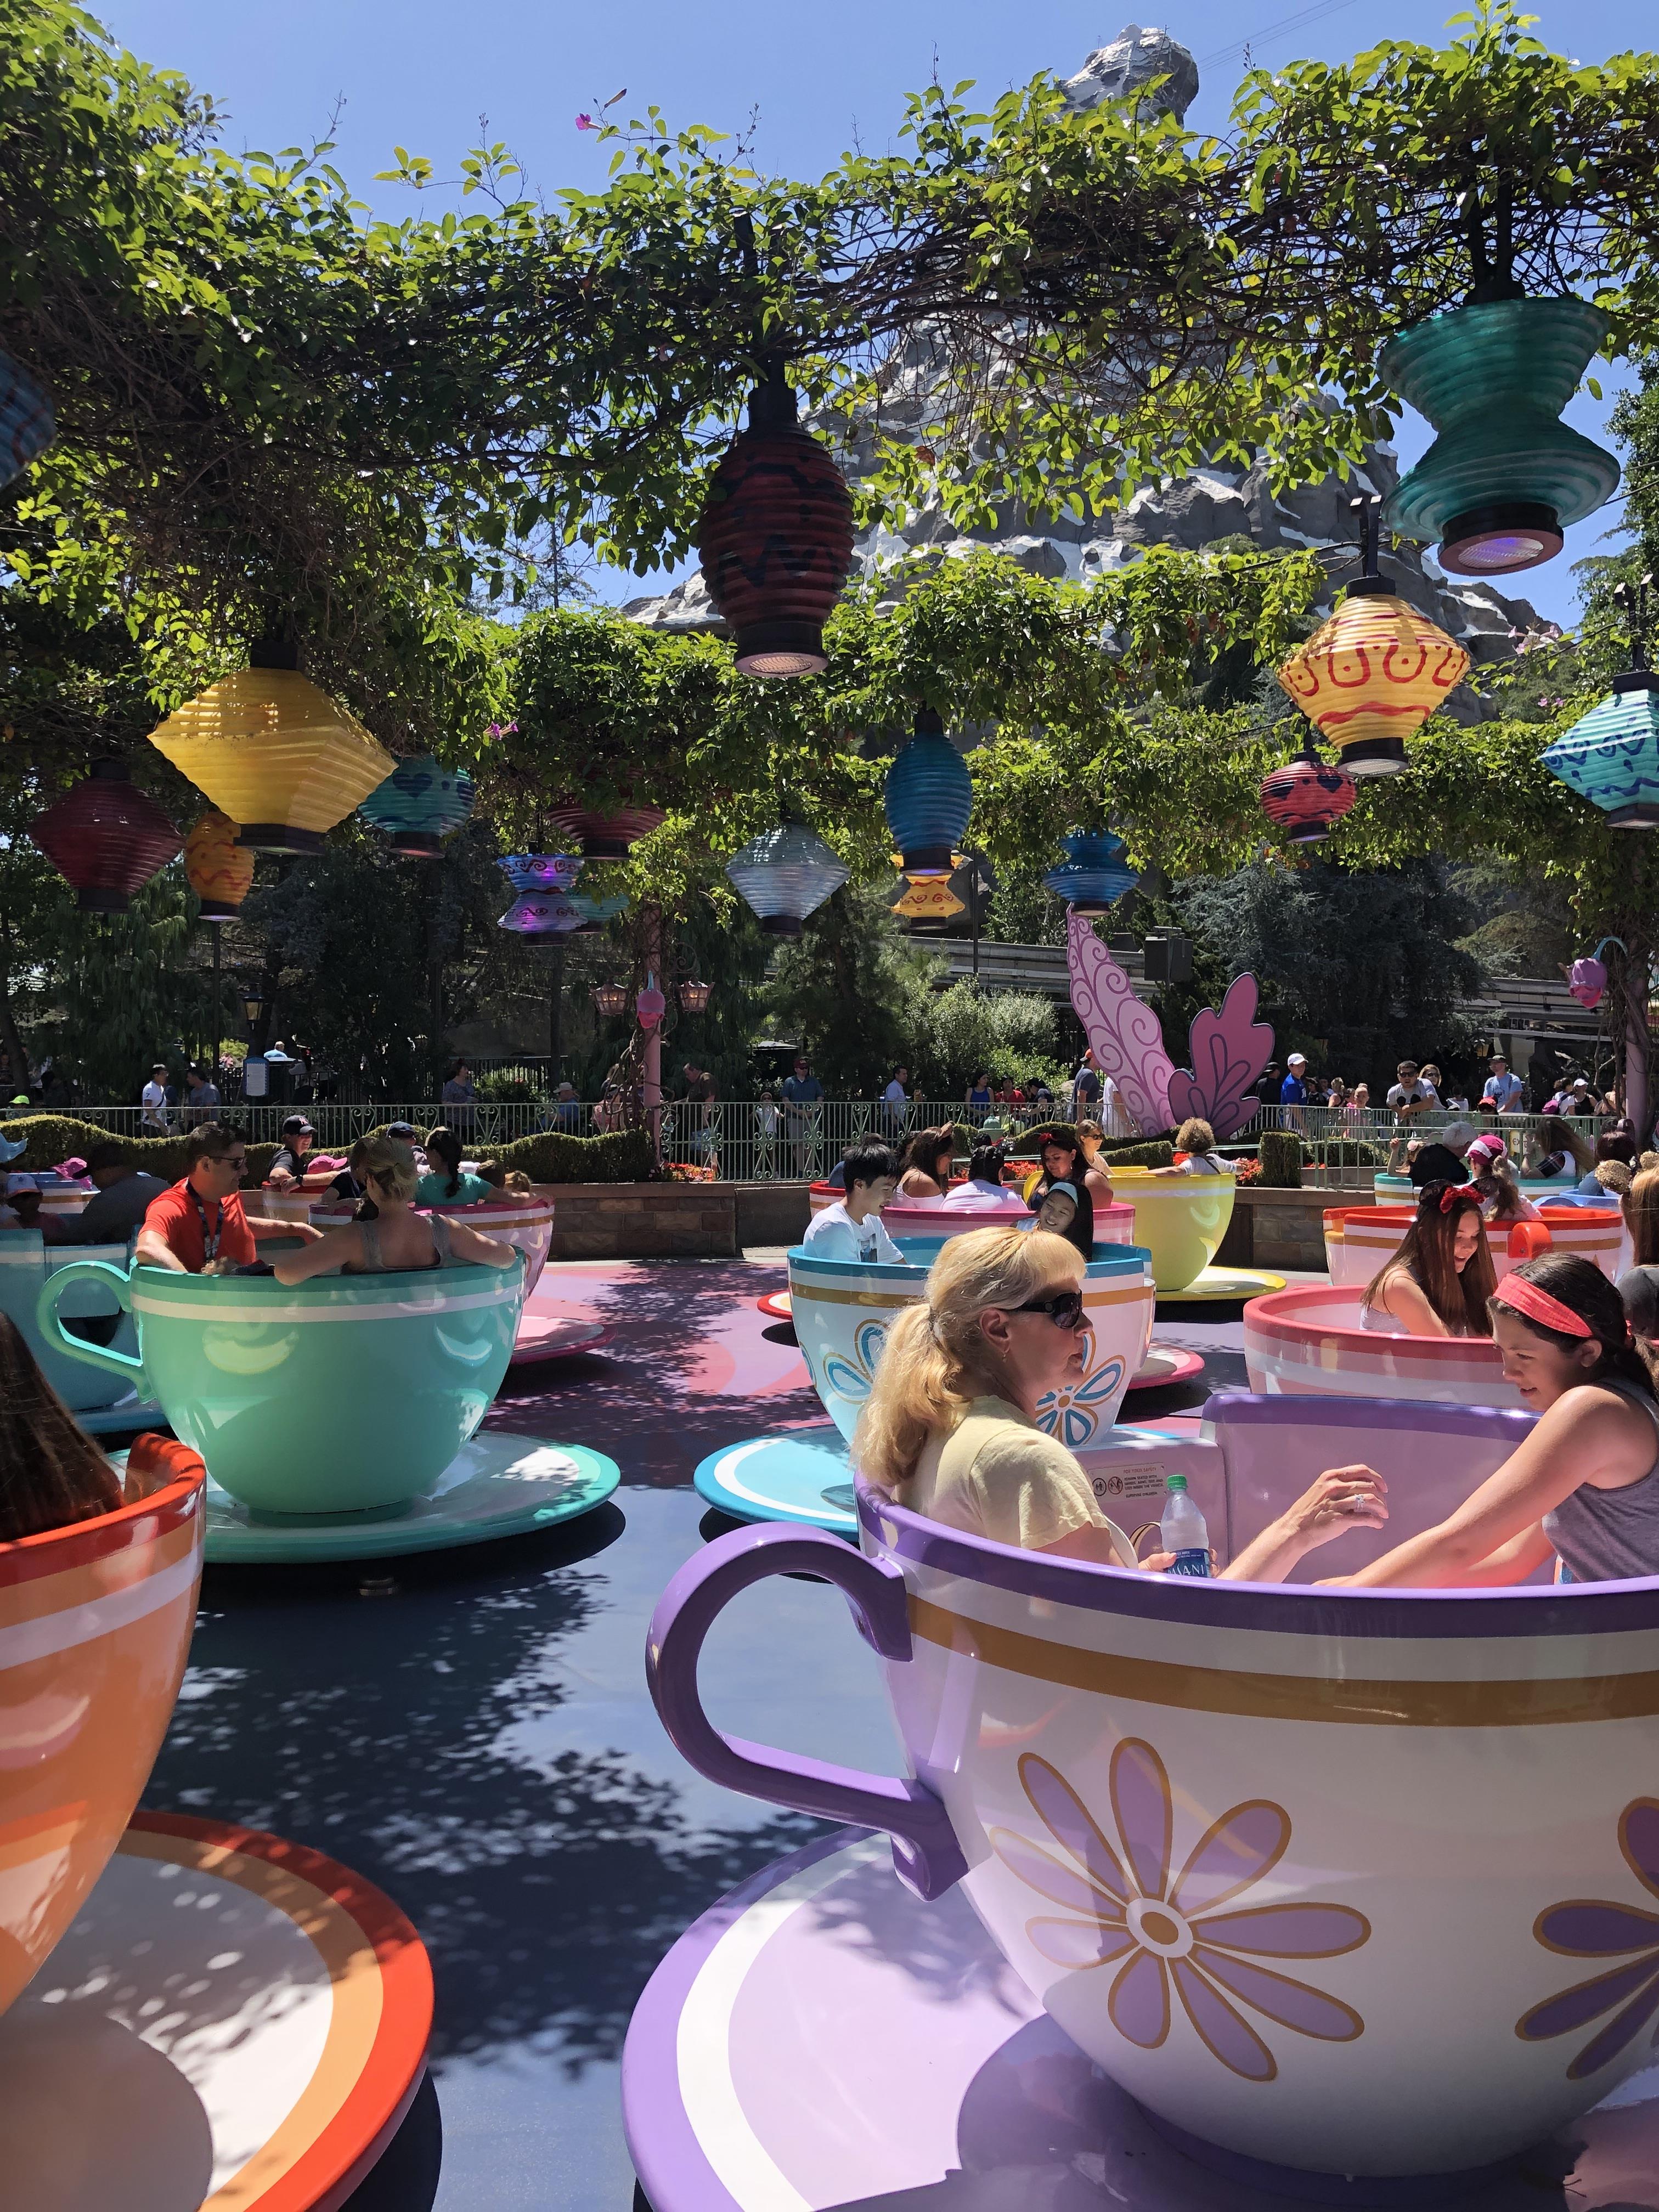 A view of the teacup ride at Disneyland, with multiple people riding giant, colorful teacups underneath vines with hanging, colorful lanterns. 